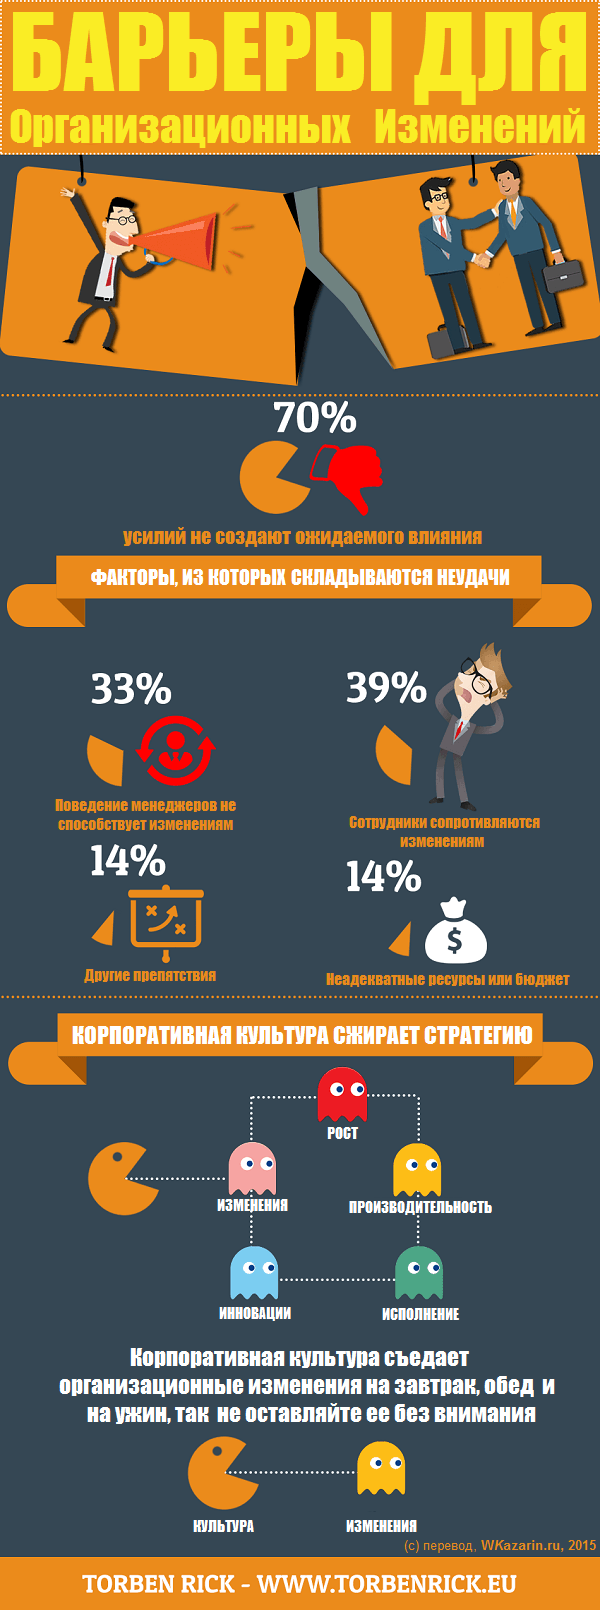 Infographic-Barriers-to-organizational-change-rus